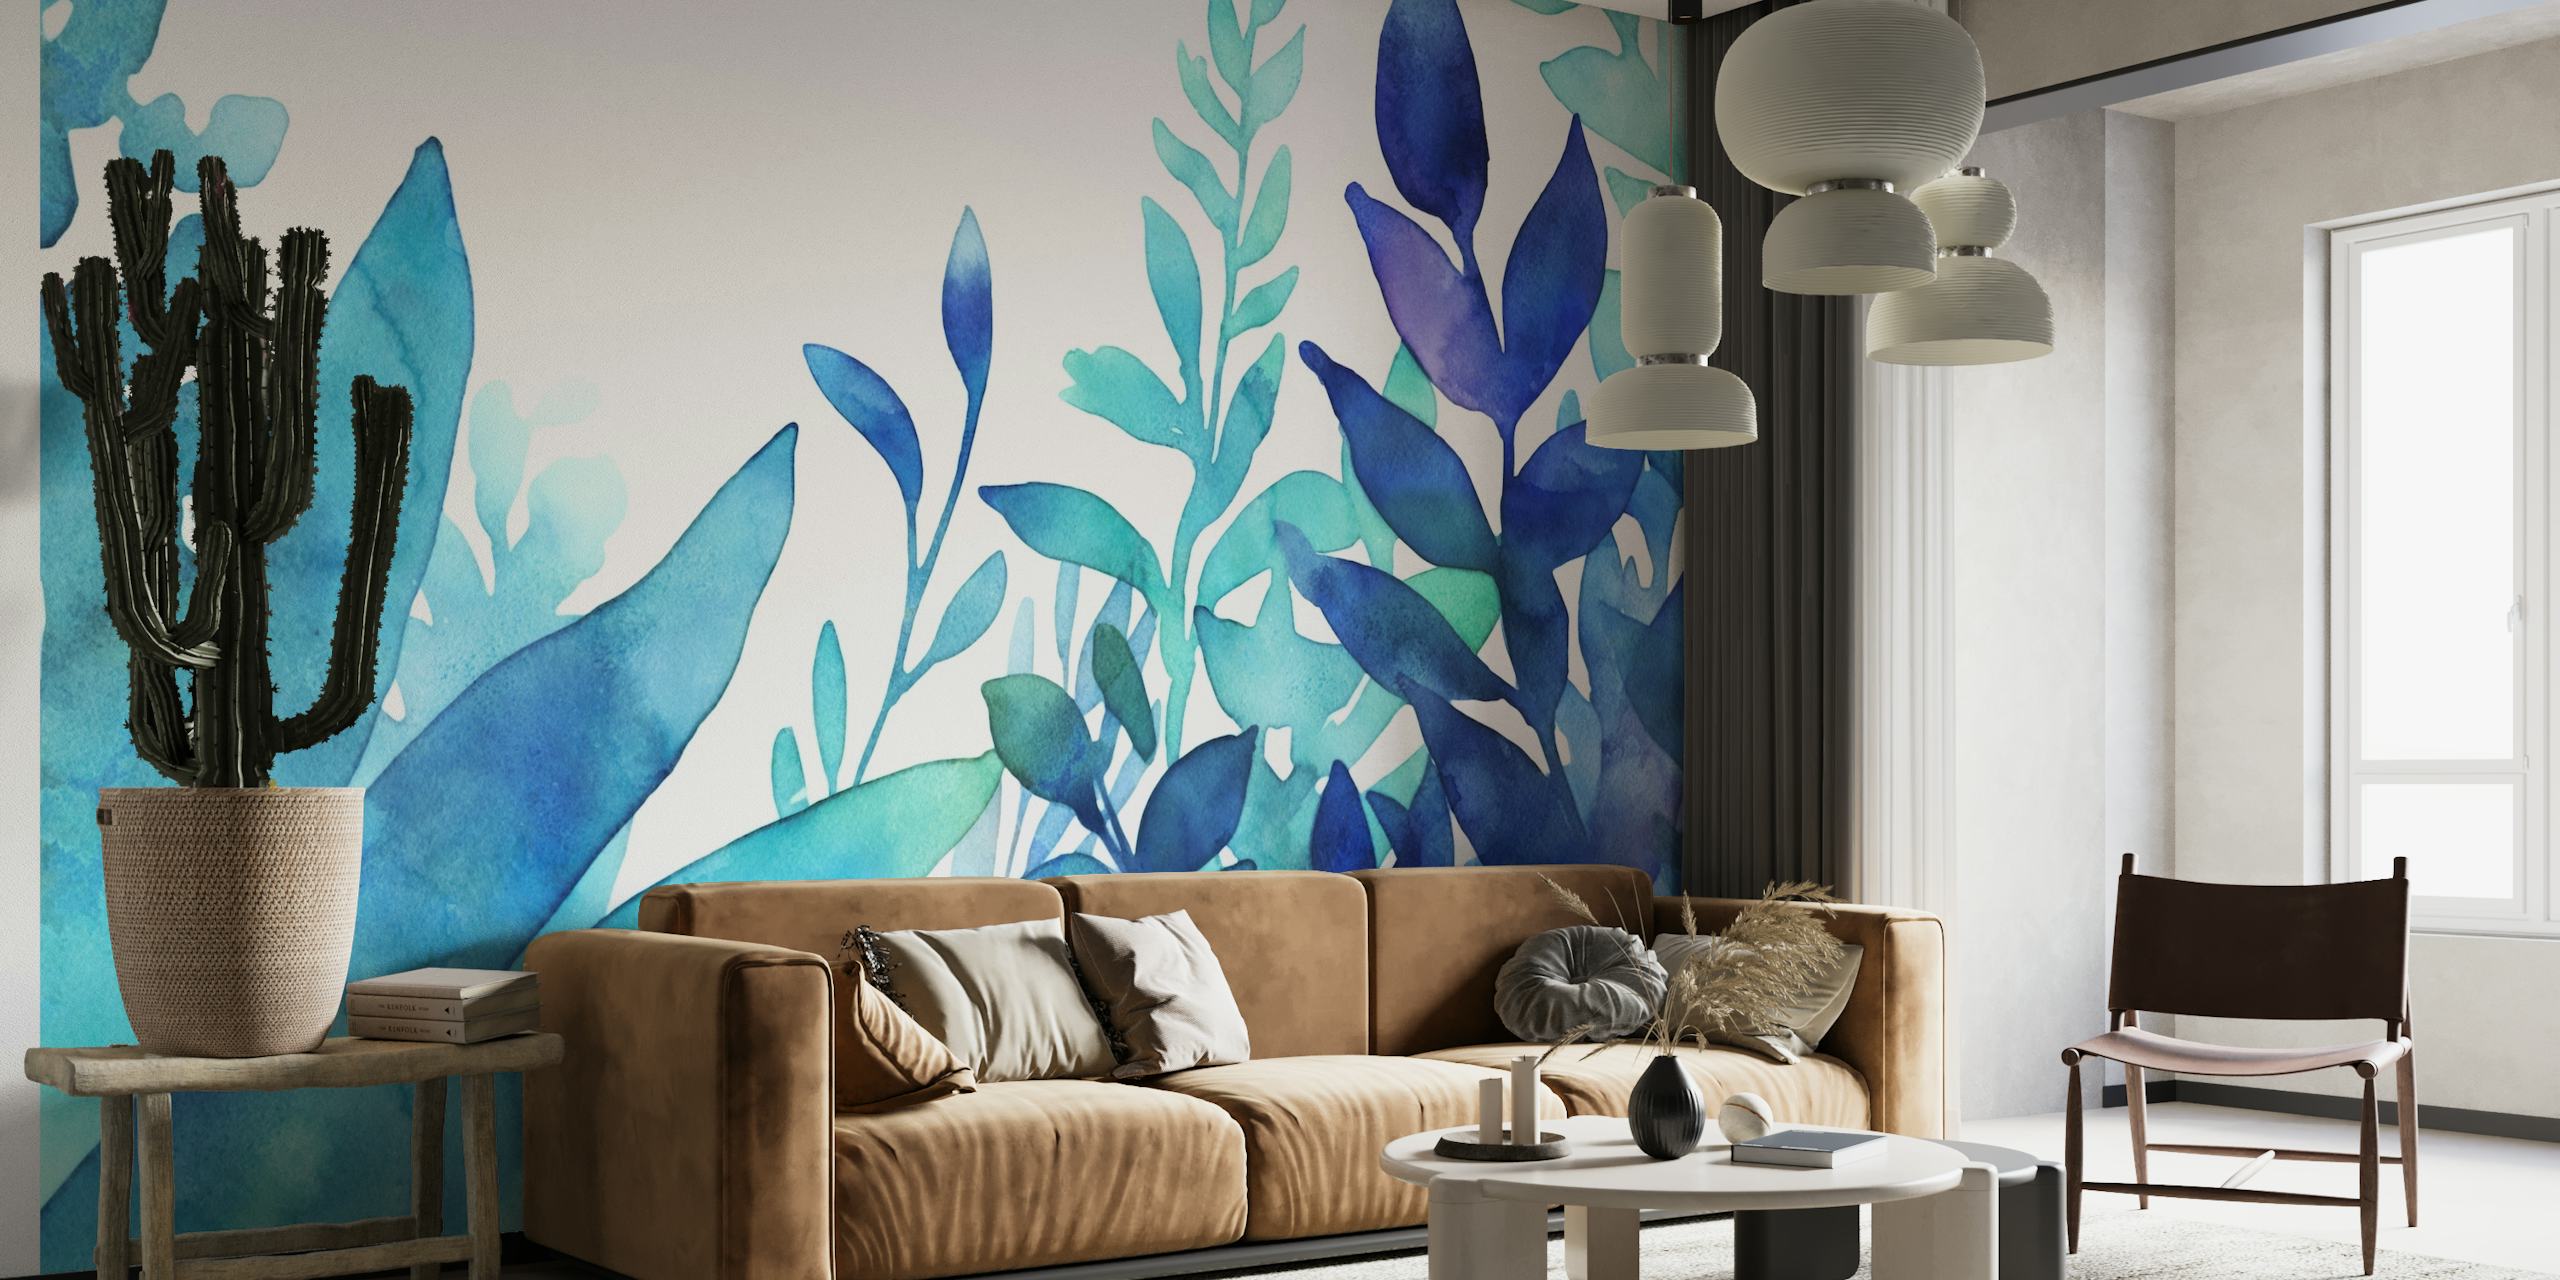 A lush display of turquoise and blue watercolor foliage for a tranquil wall mural.